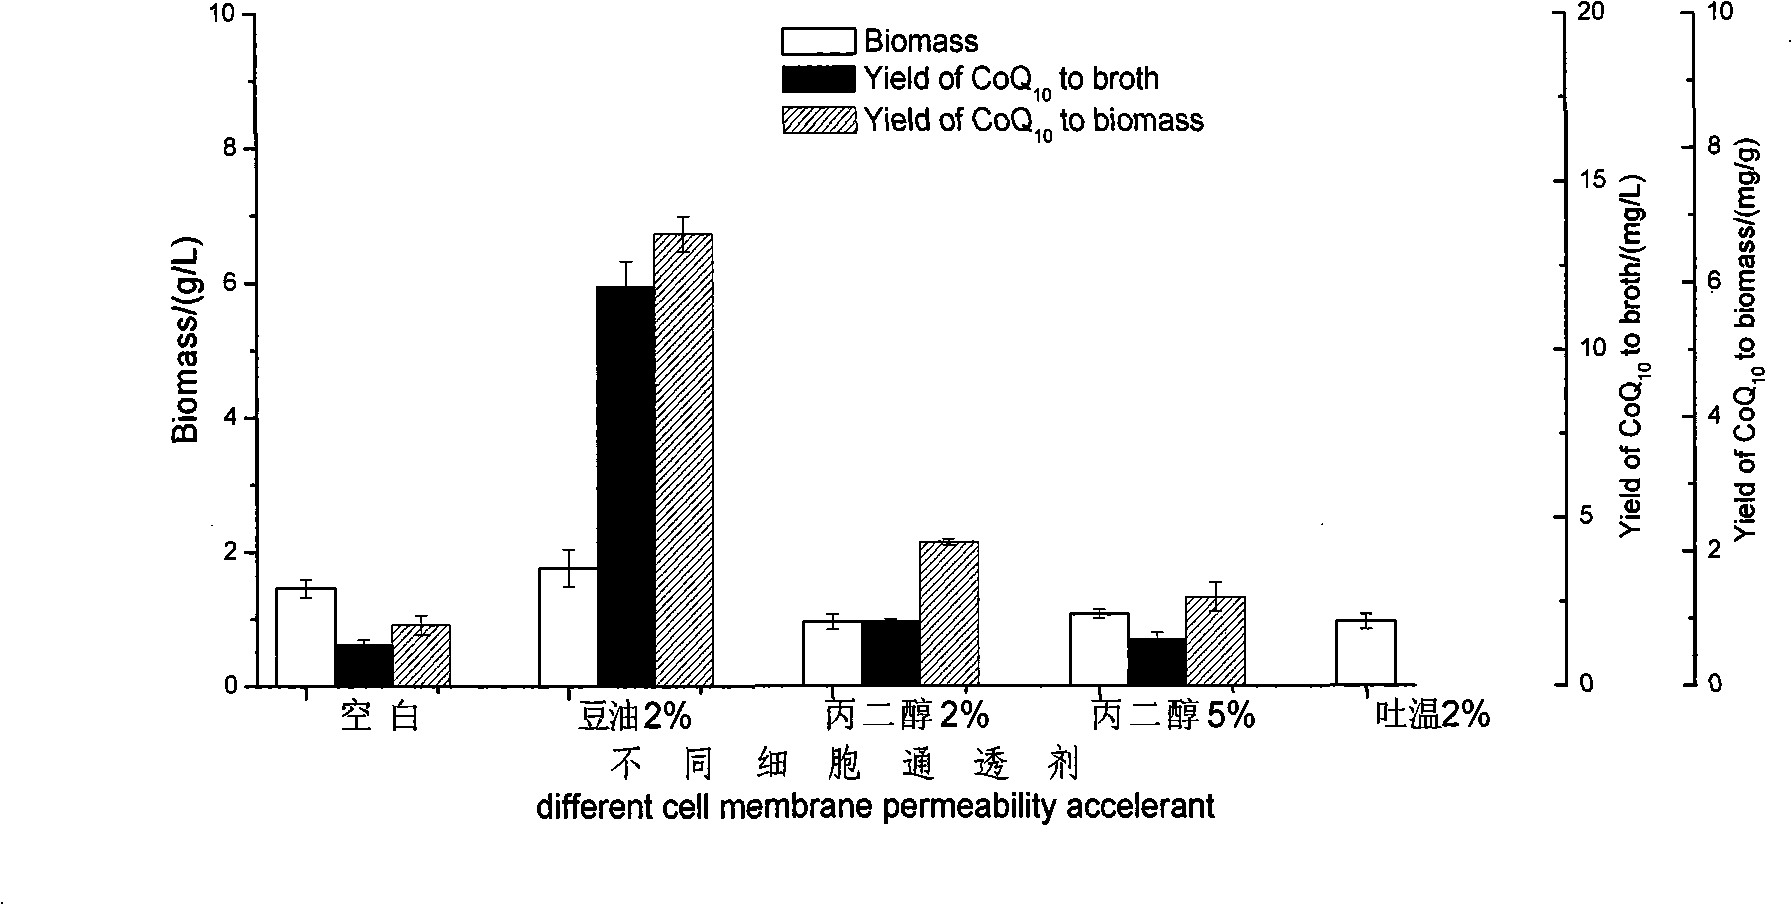 Process for preparing coenzyme Q10 by sphingosine unit cell strain fermentation, extraction and coupling